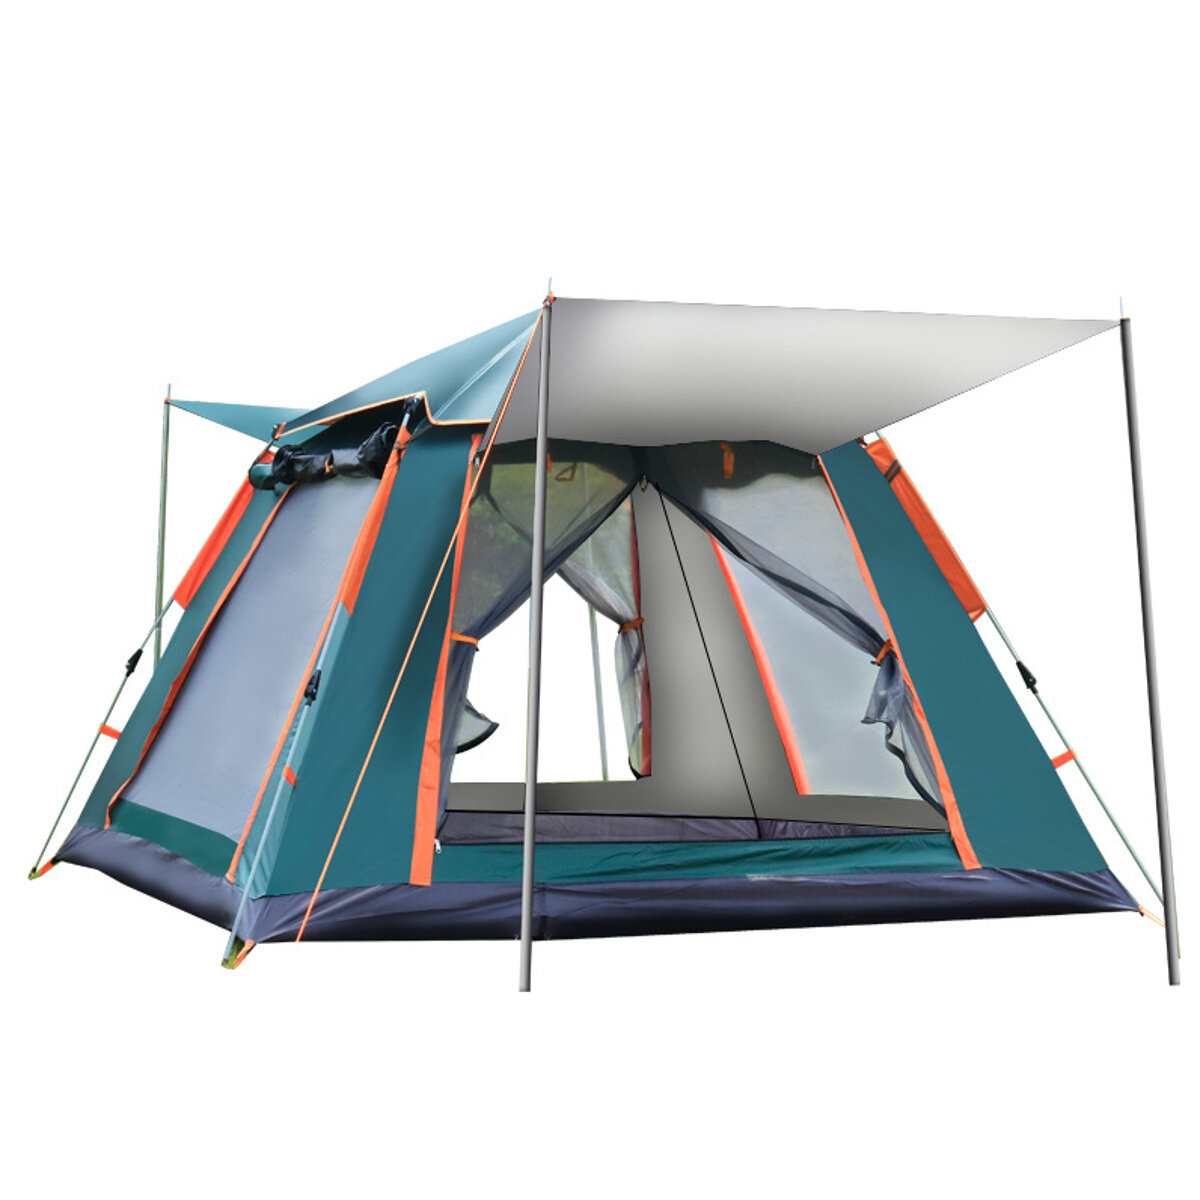 IPRee? 6-7 People Fully Automatic Tent Silver Glue Outdoor Camping Family Picnic Travel Tent